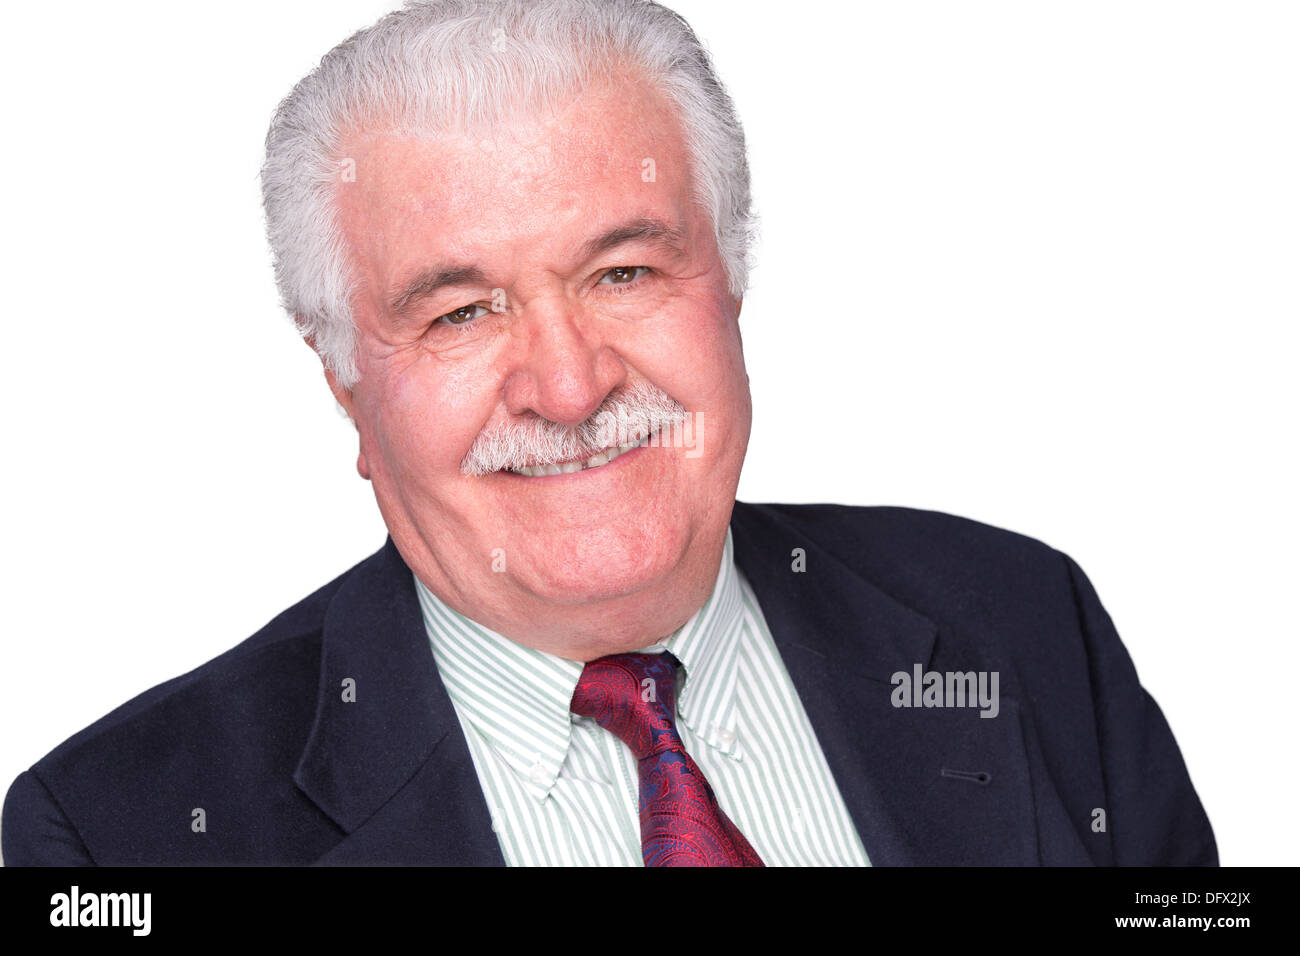 Senior white hair man with a red tie and dark blue suite smiling trustfully Stock Photo